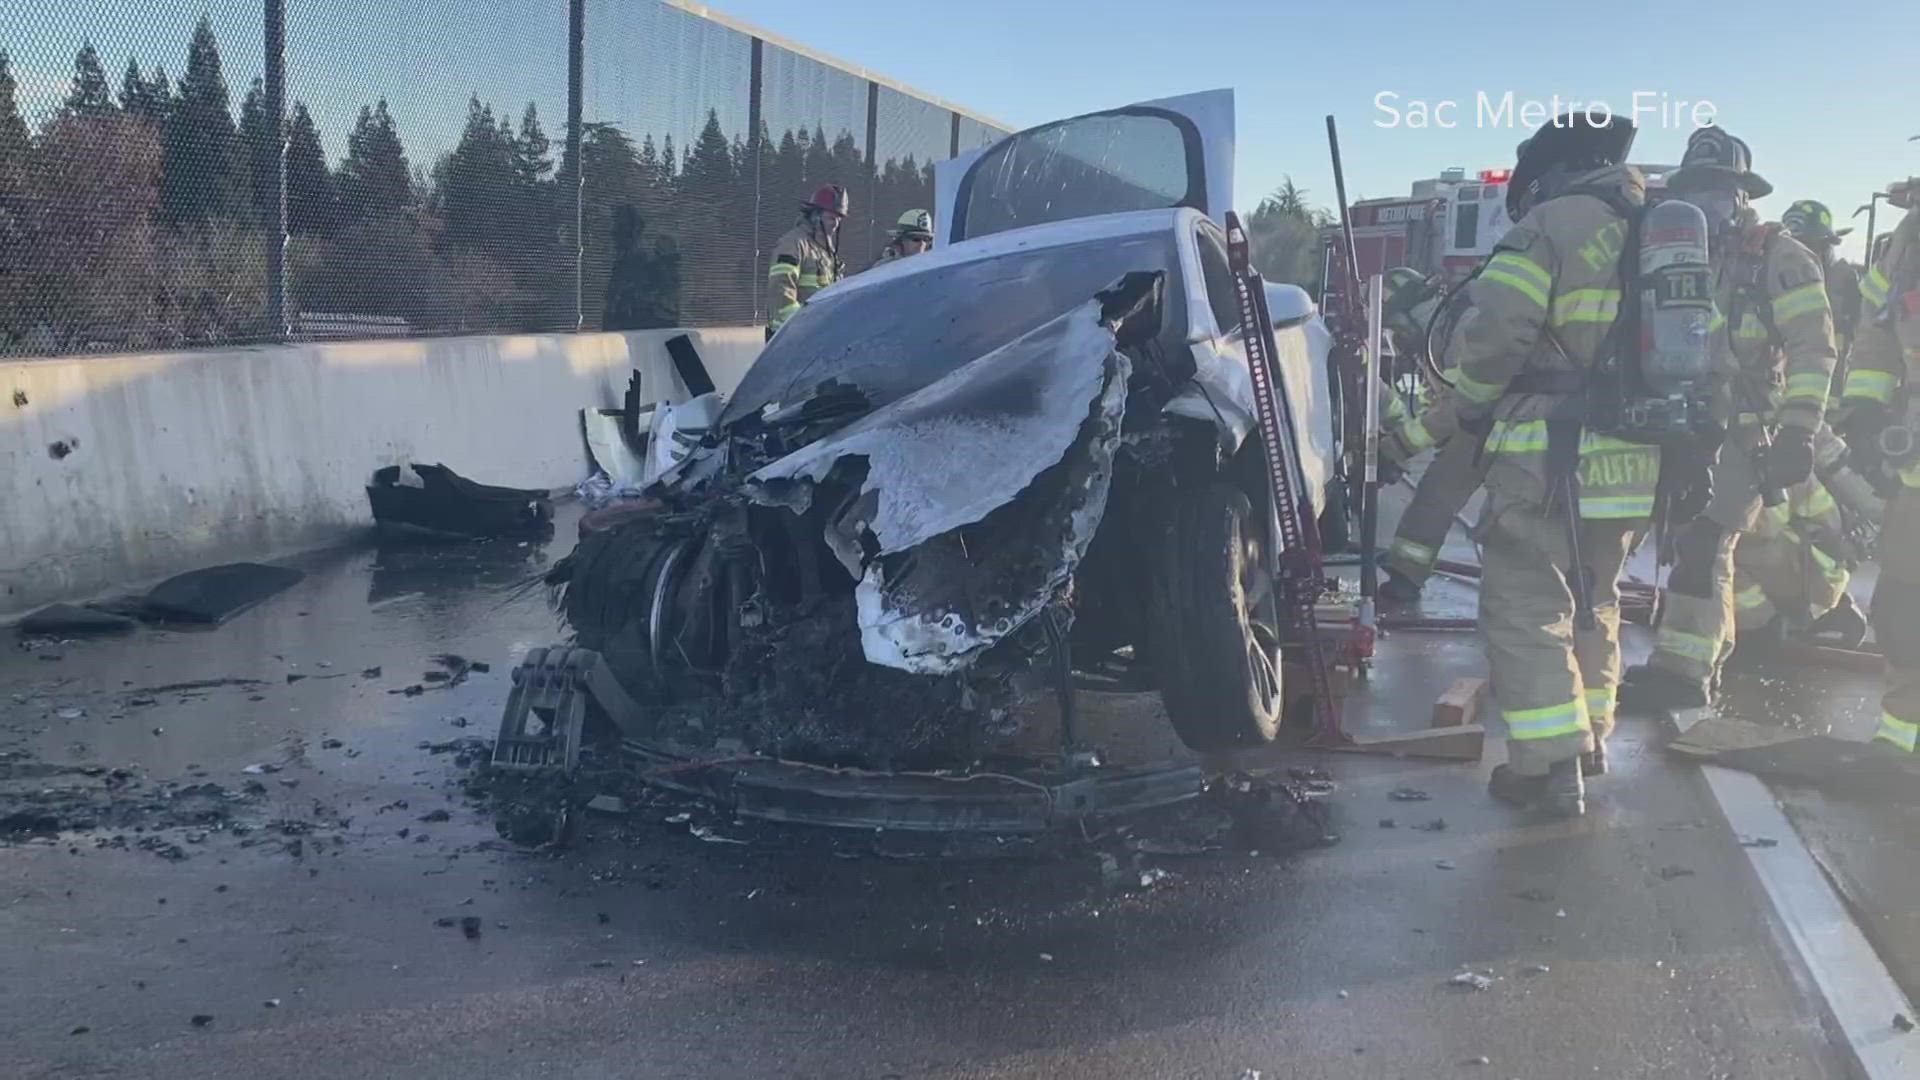 A Tesla Model S was engulfed in flames, causing two lanes on eastbound Highway 50 to close, according to officials.